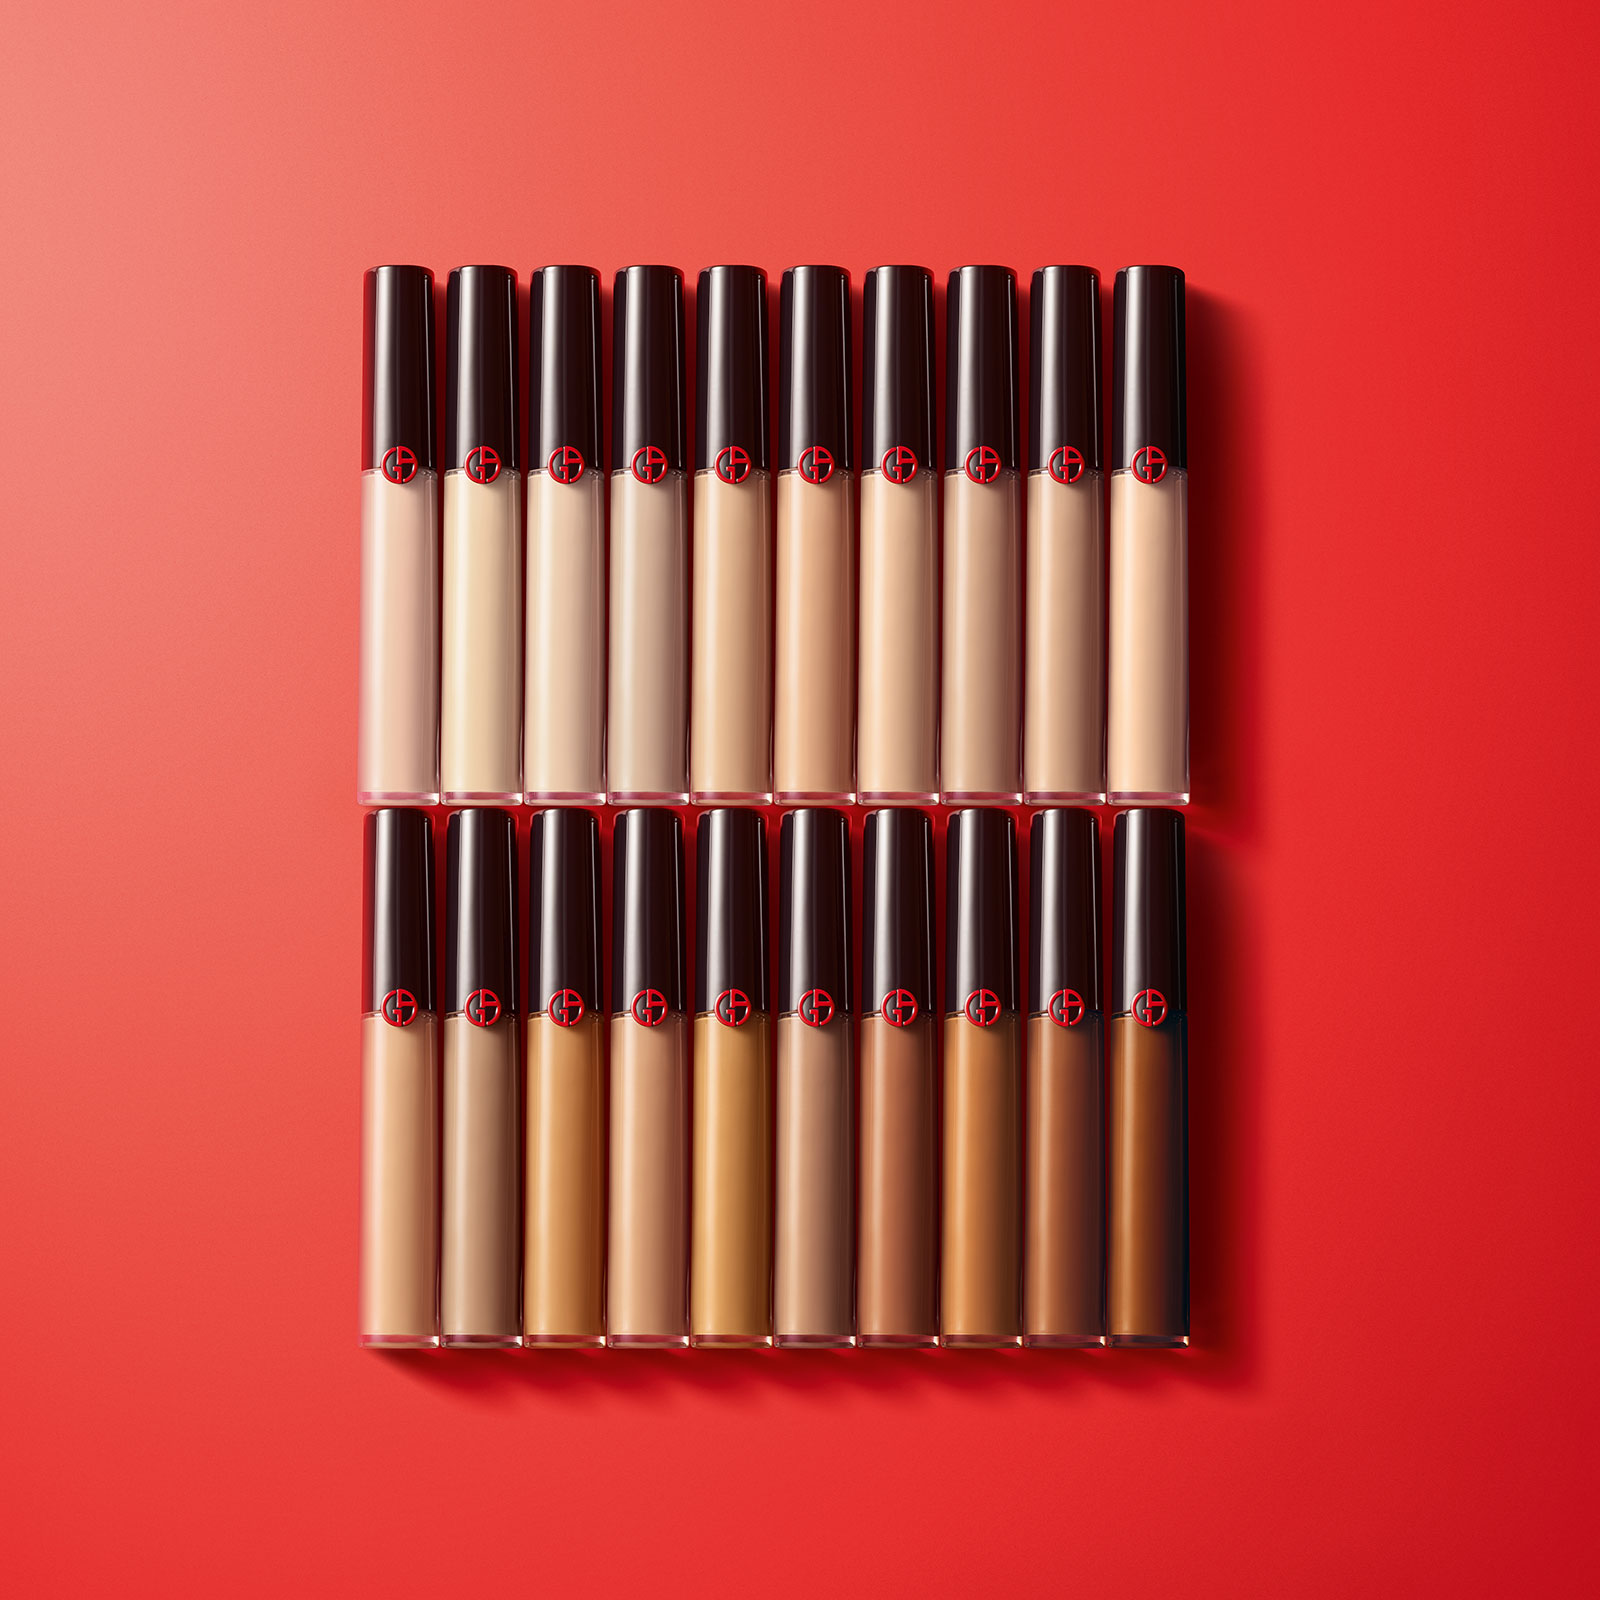 armani power fabric concealer swatch